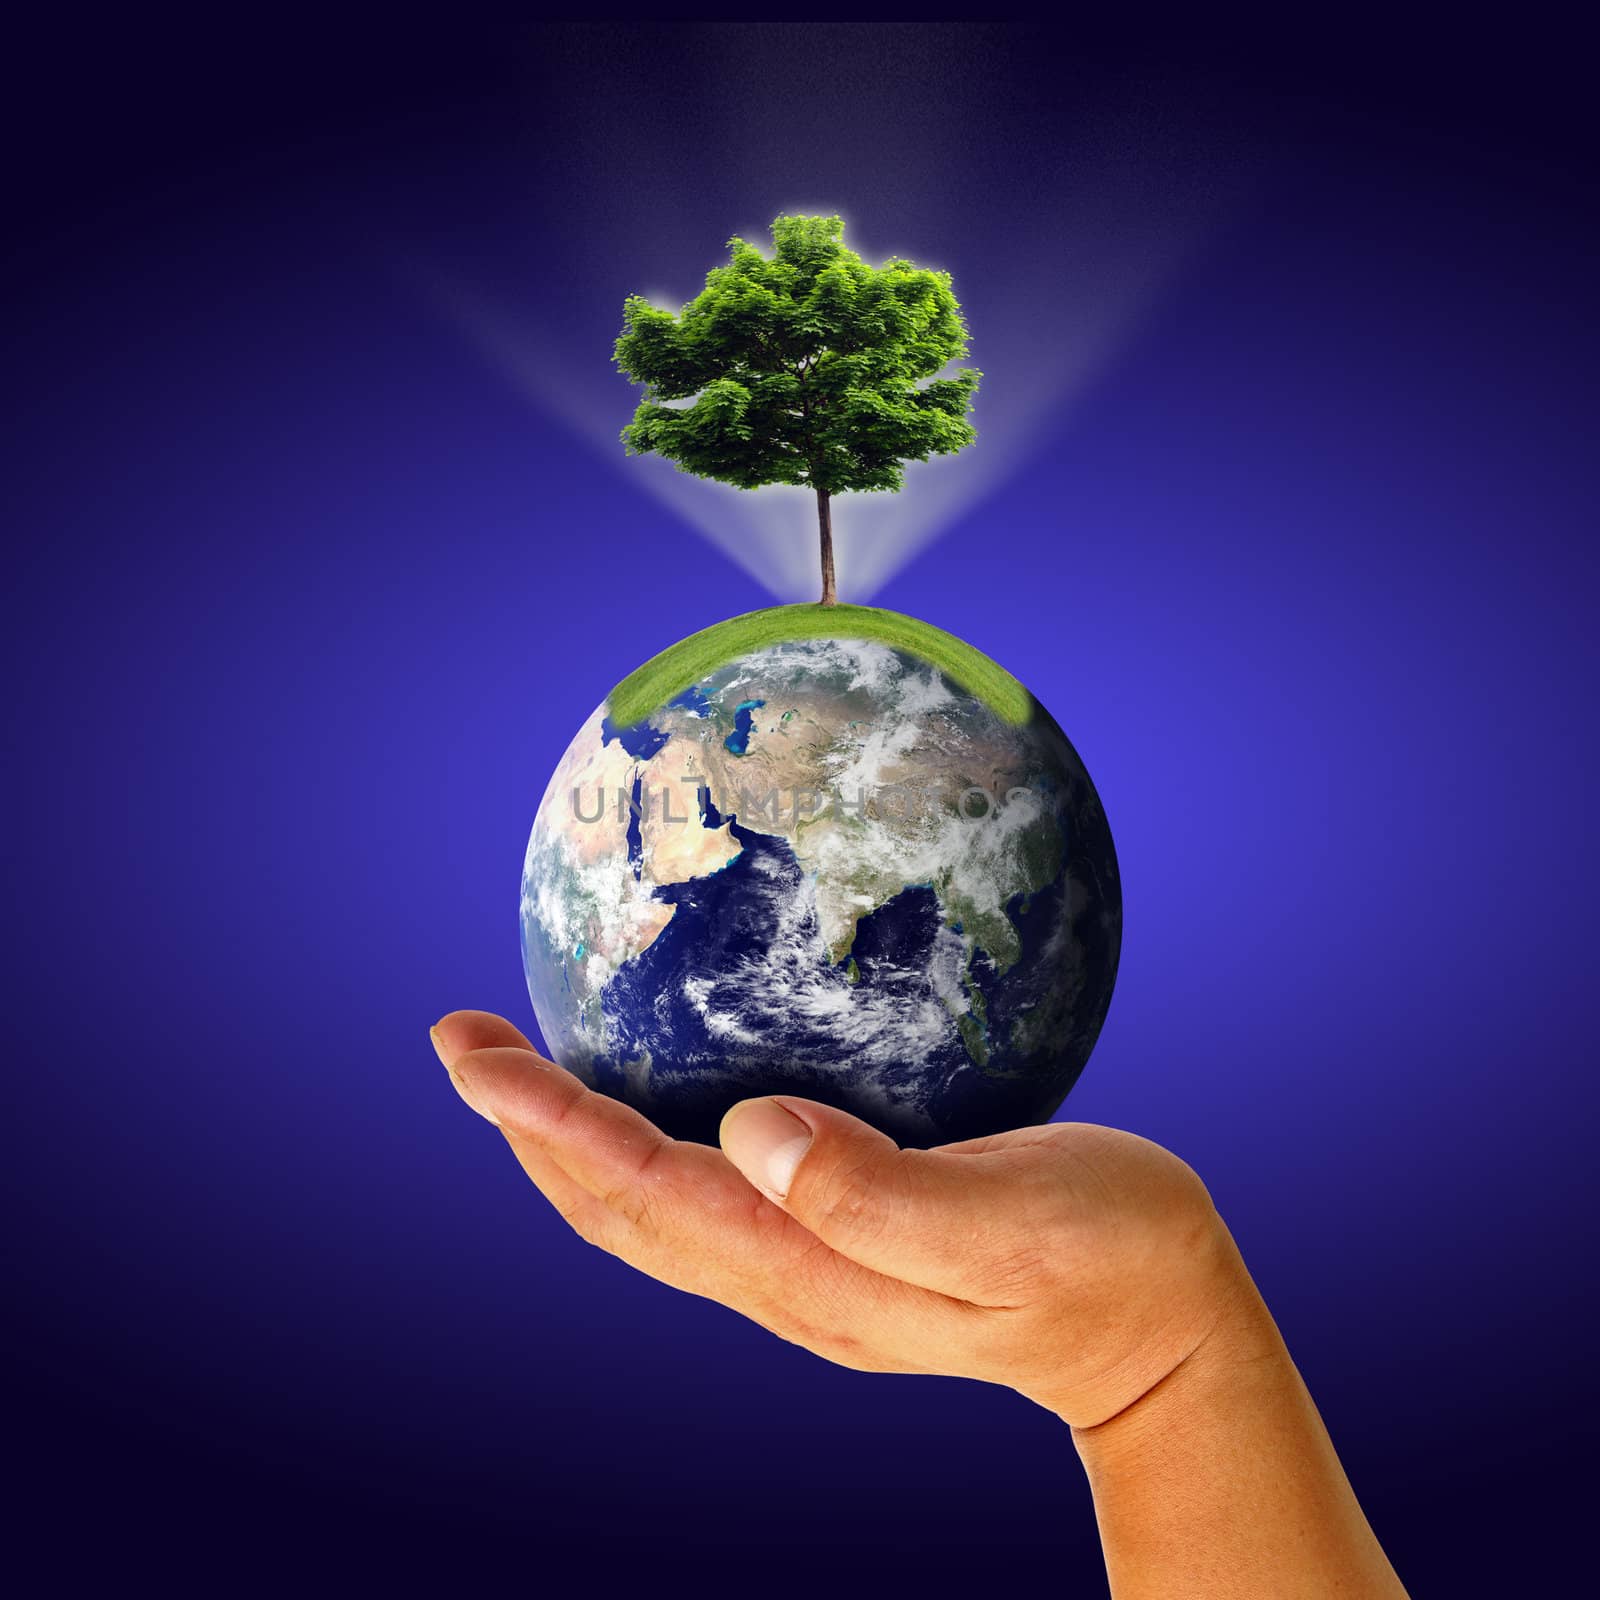 Male hand holding the Earth with tree